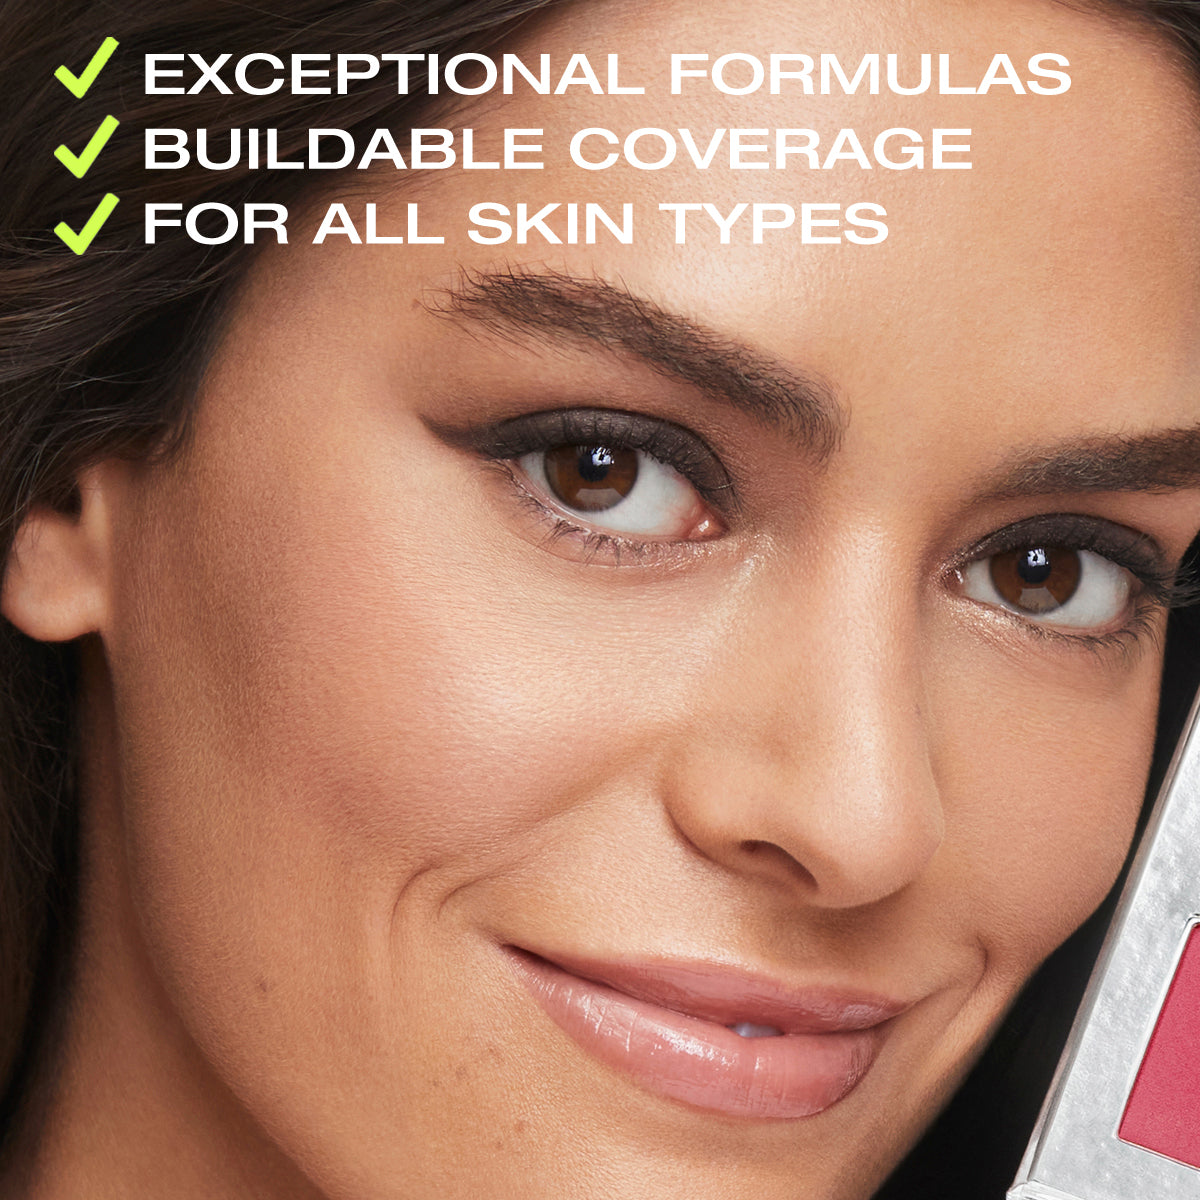 Exceptional formulas, buildable coverage, for all skin types